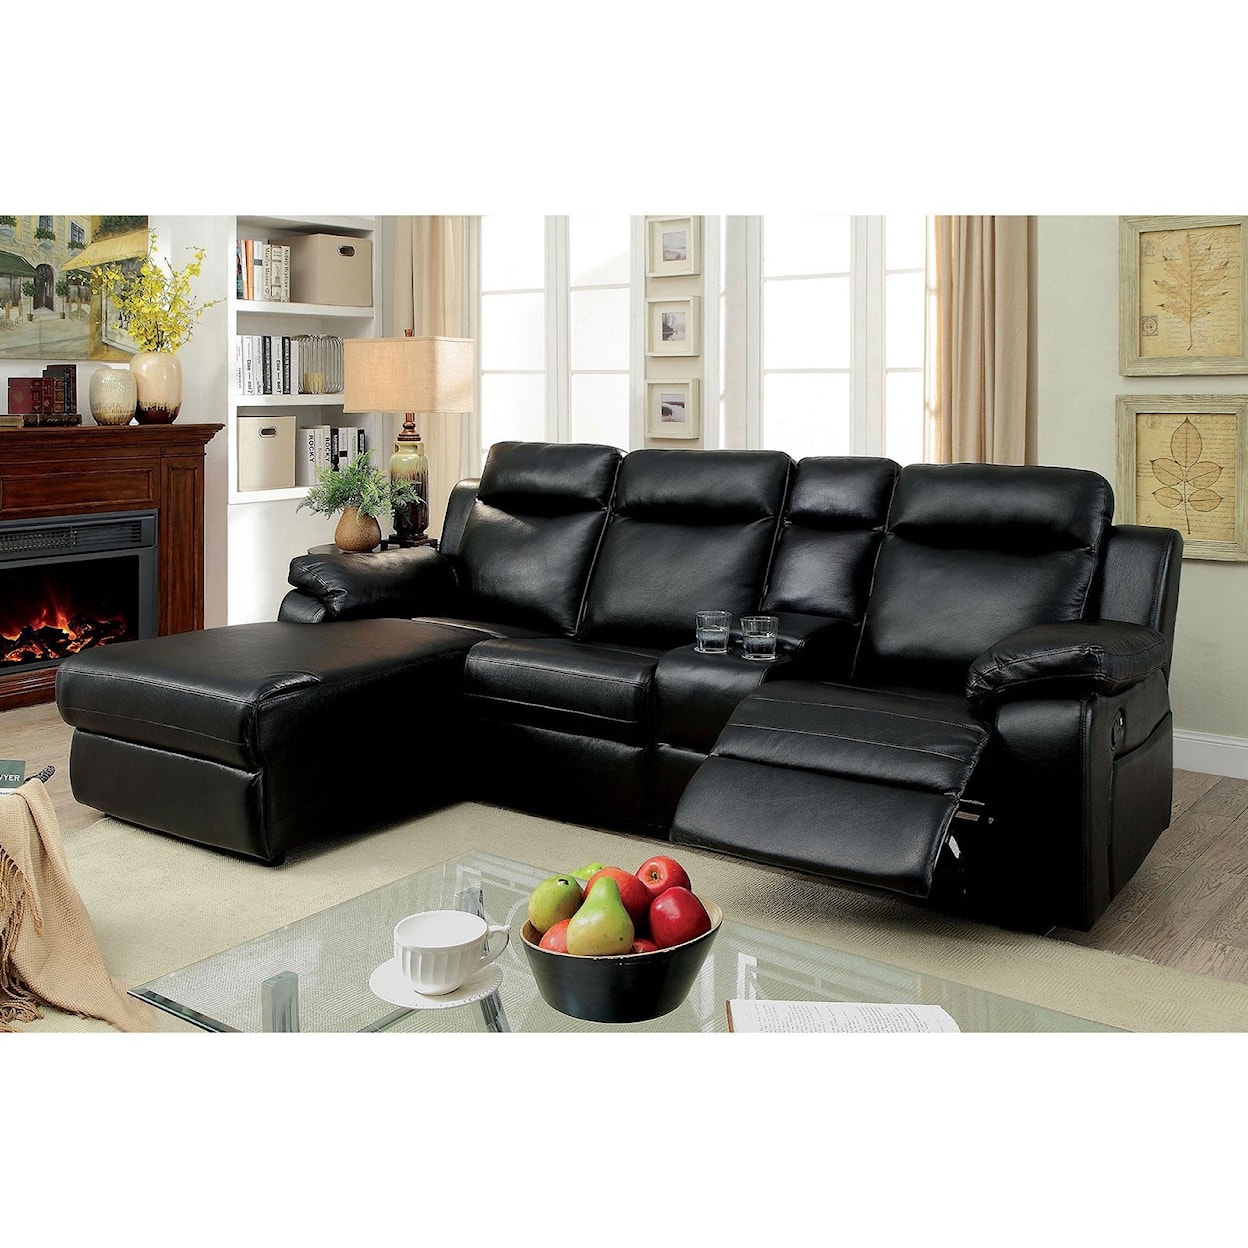 Furniture of America Hardy Sectional